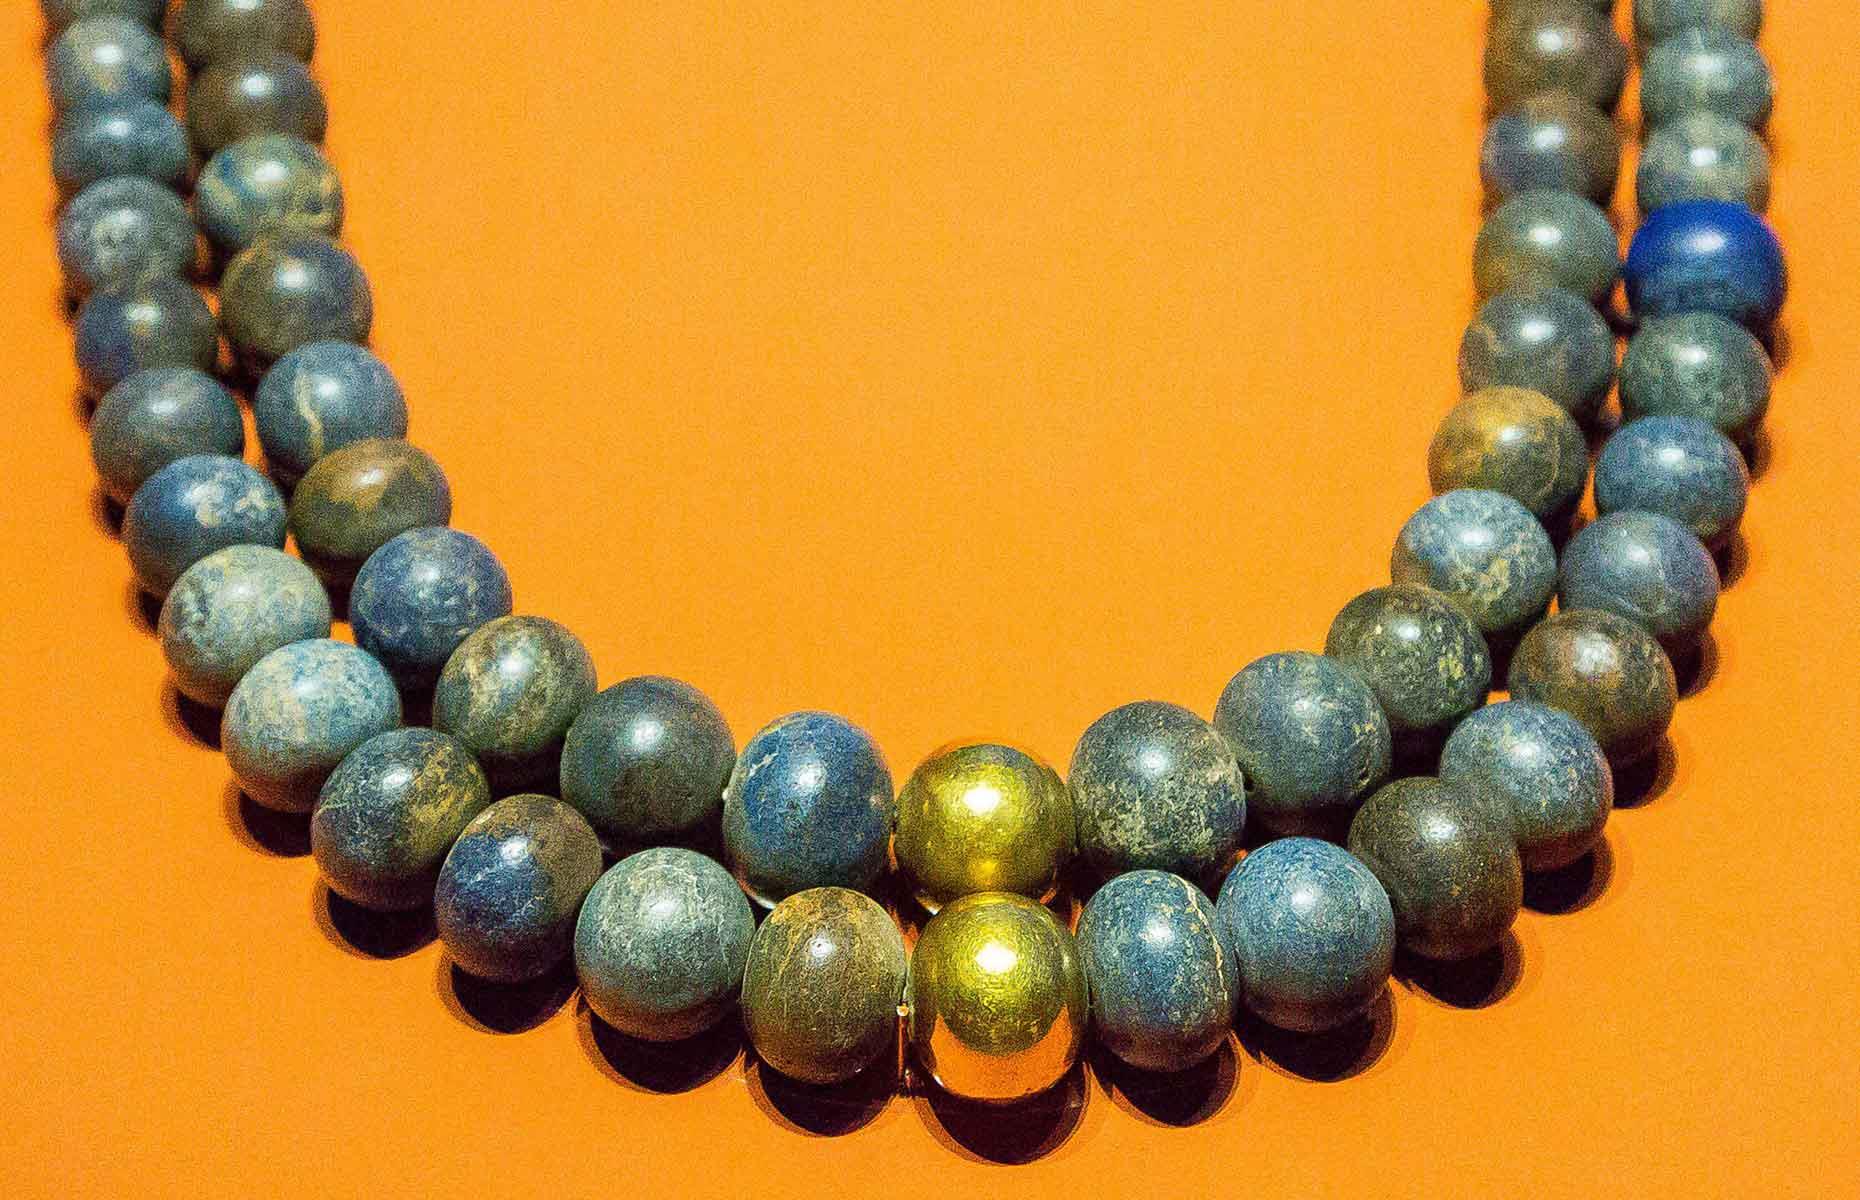 <p>This beaded necklace was found in king Psusennes I's tomb. The two rows of beads are made from lapis lazuli with two golden beads in the middle, and date back to roughly 1069-945 BC. Unusually, there's an <a href="https://nilescribes.org/2017/08/19/lecture-tanis-egypt-capital-and-royal-tombs/">Assyrian inscription</a> on one of the beads, and historians are still unsure as to why this foreign item was found in an Egyptian king's tomb...</p>